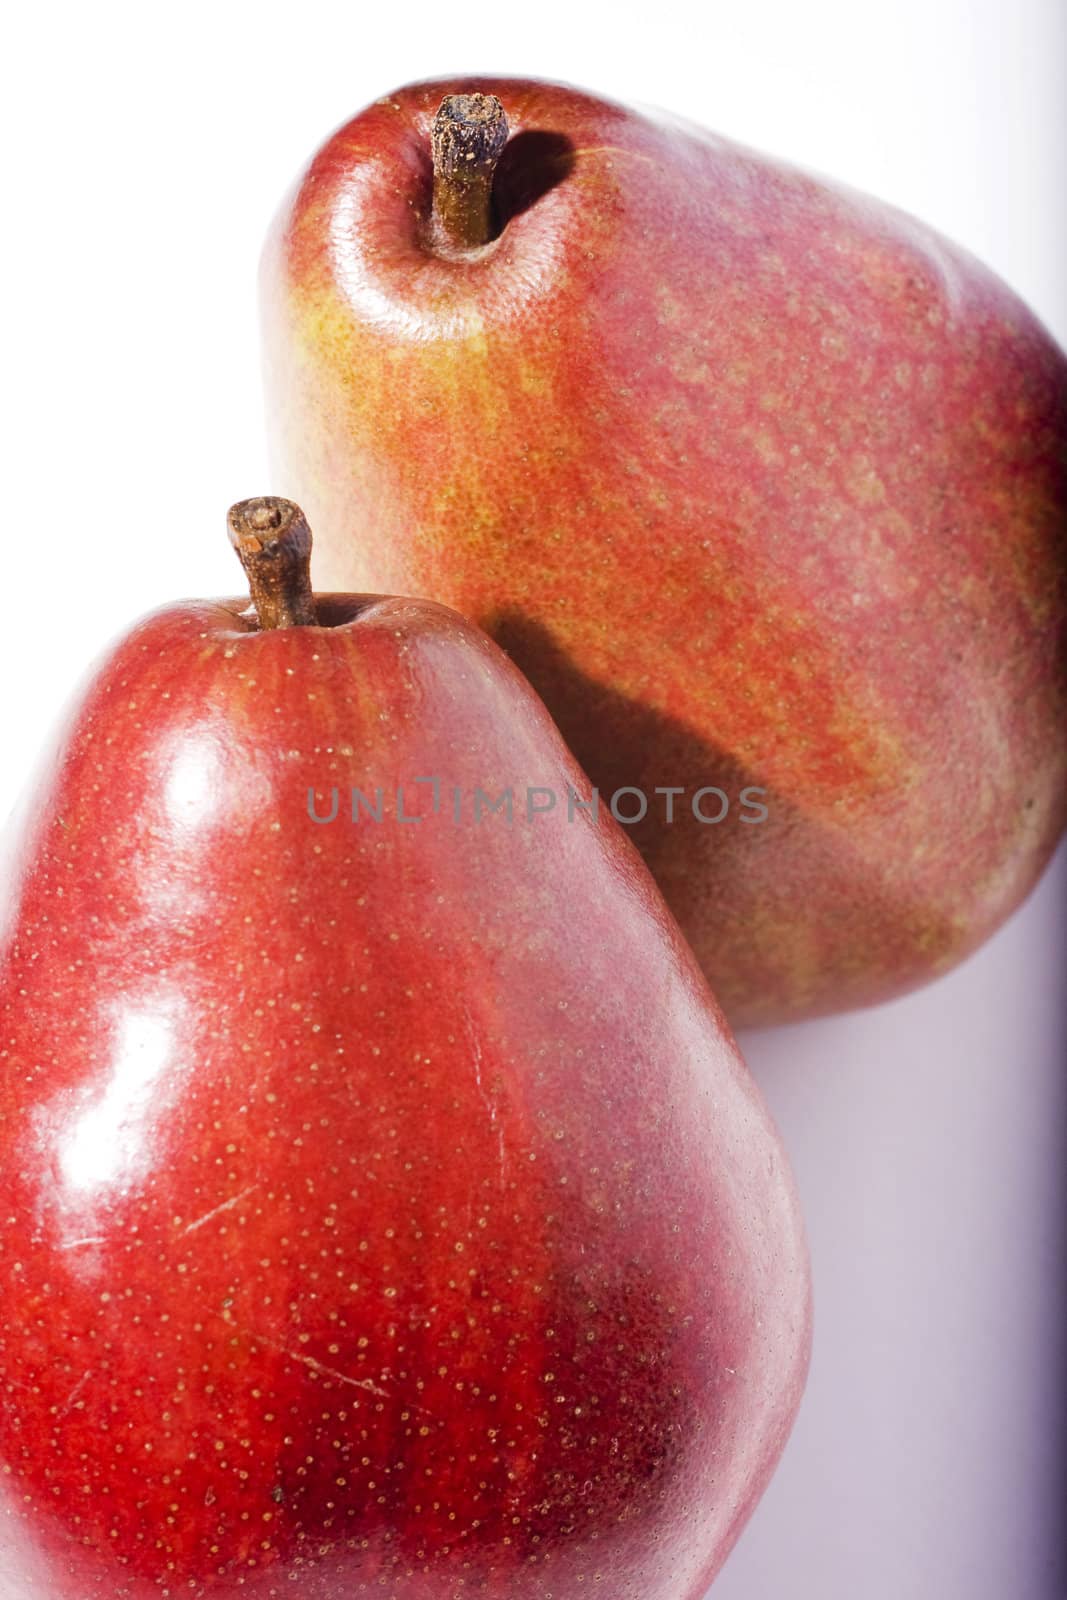 it is there of Red apples on background